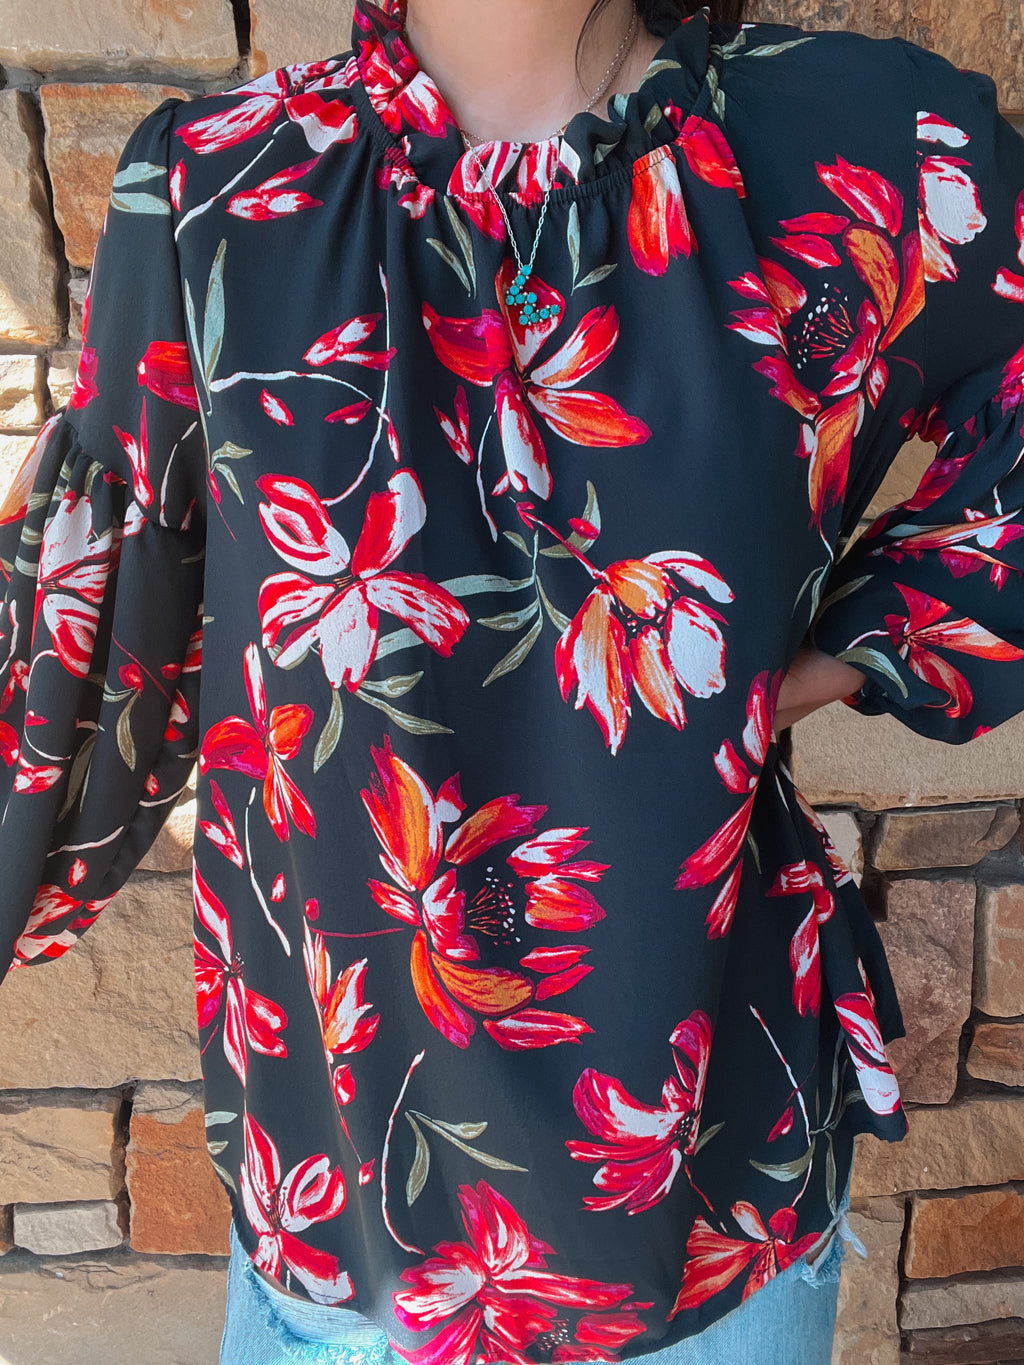 The Floral Long Sleeve Blouse